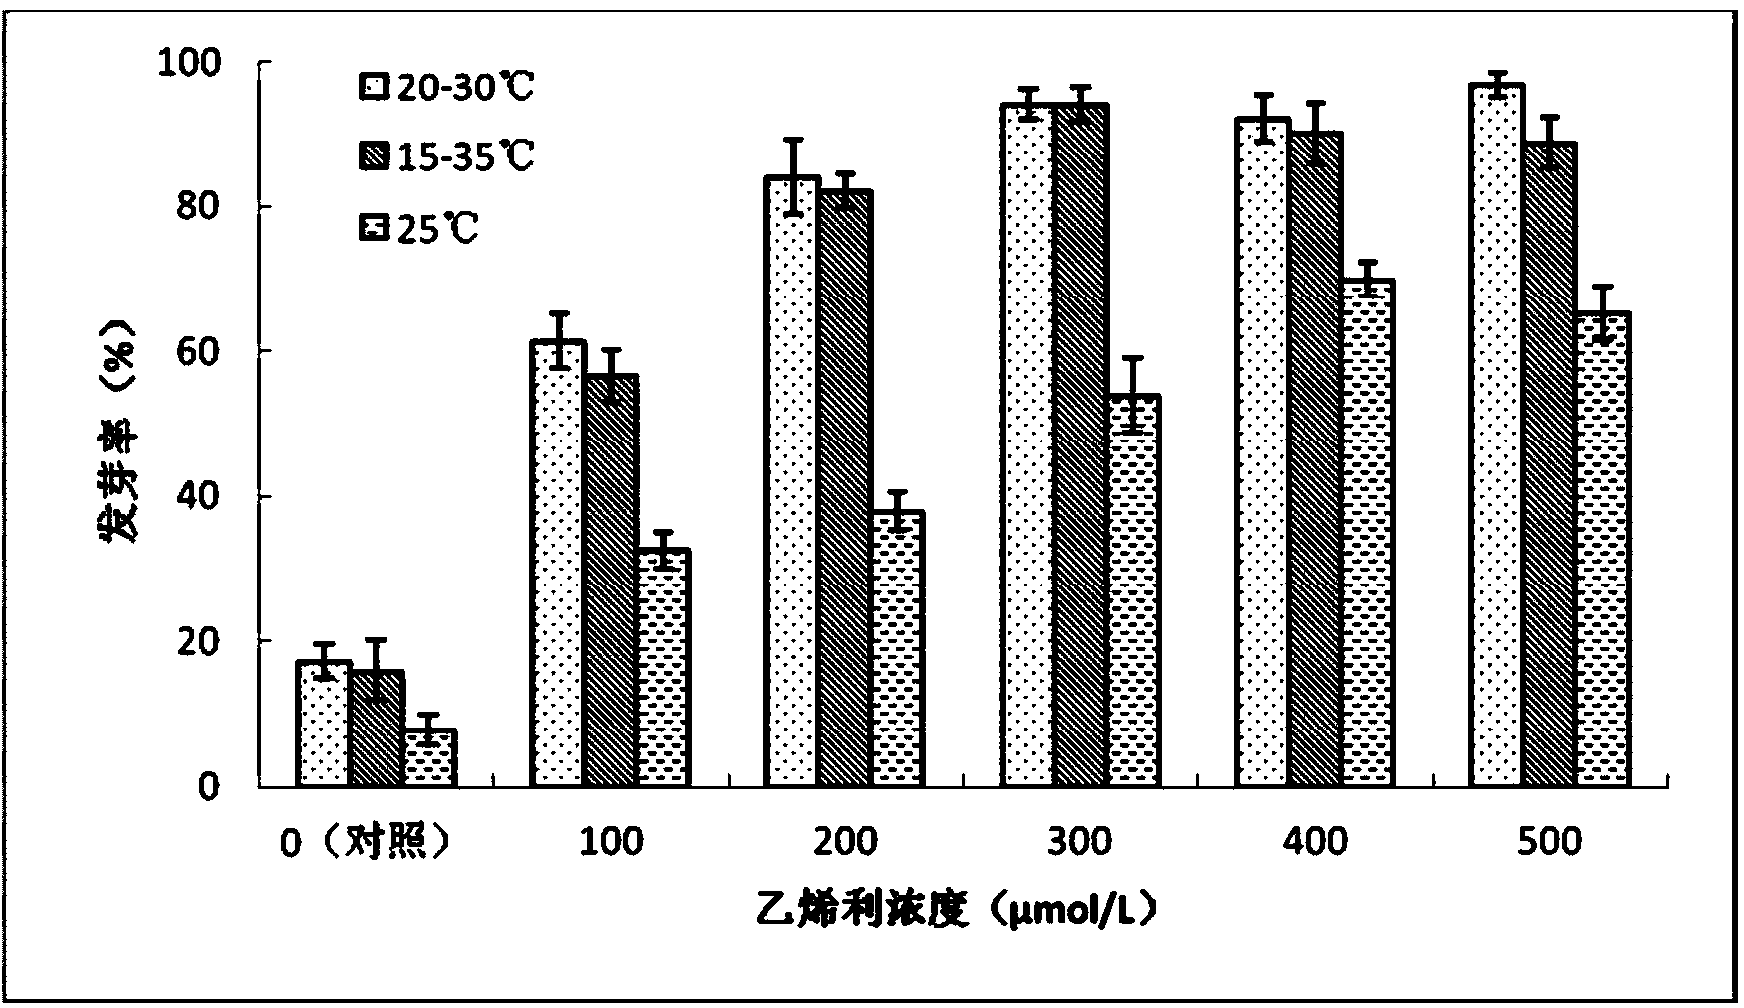 Method for economically and quickly breaking dormancy of sand rice seeds and accelerating sand rice seeds to germinate